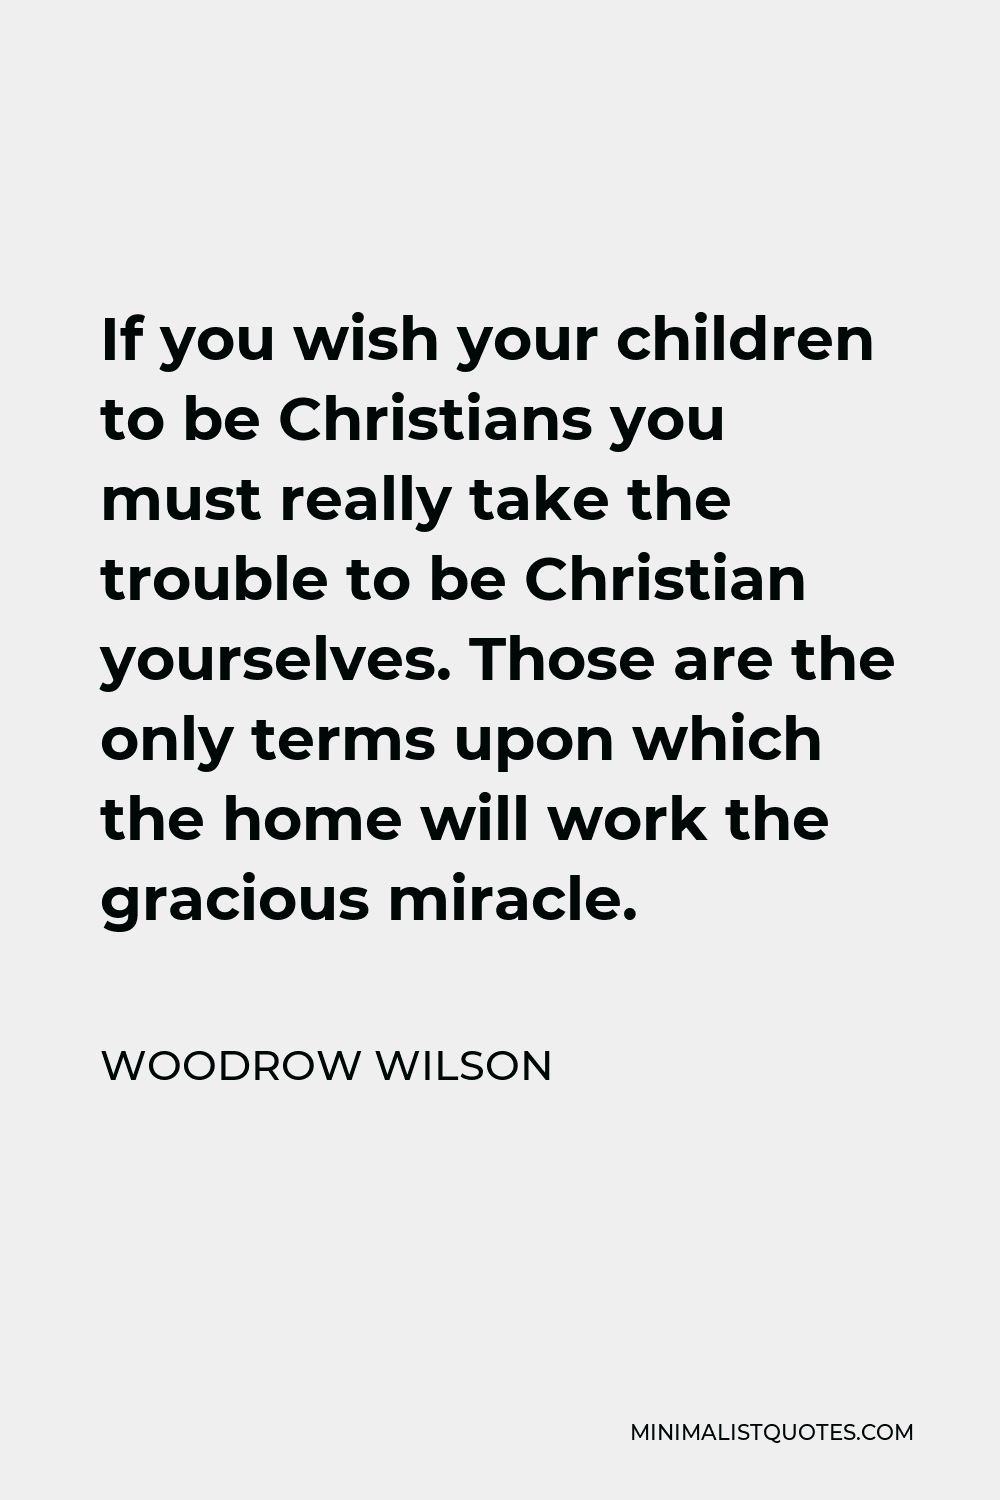 Woodrow Wilson Quote - If you wish your children to be Christians you must really take the trouble to be Christian yourselves. Those are the only terms upon which the home will work the gracious miracle.